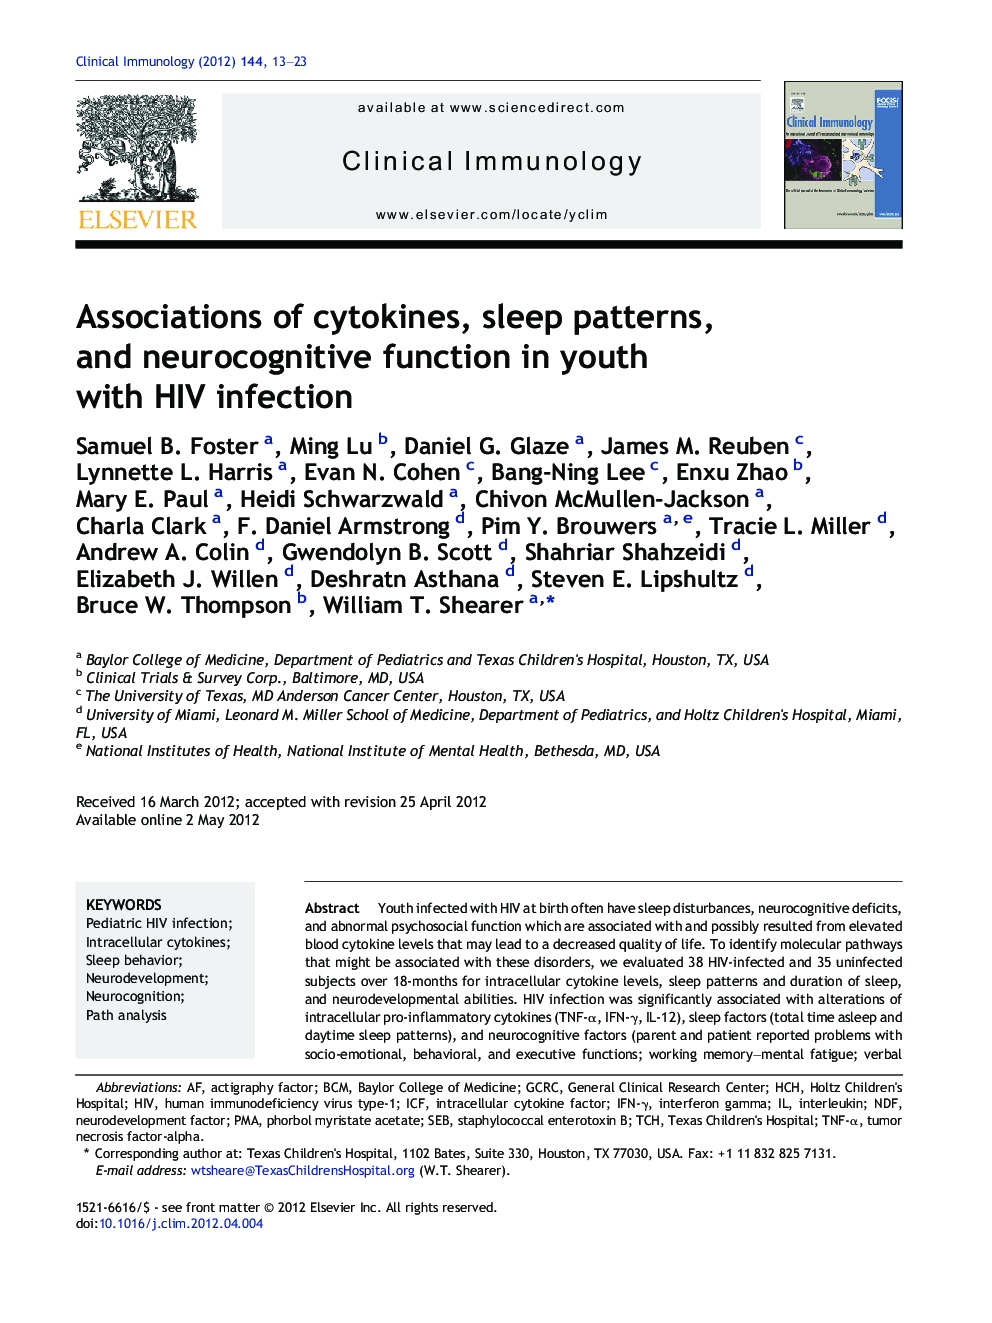 Associations of cytokines, sleep patterns, and neurocognitive function in youth with HIV infection